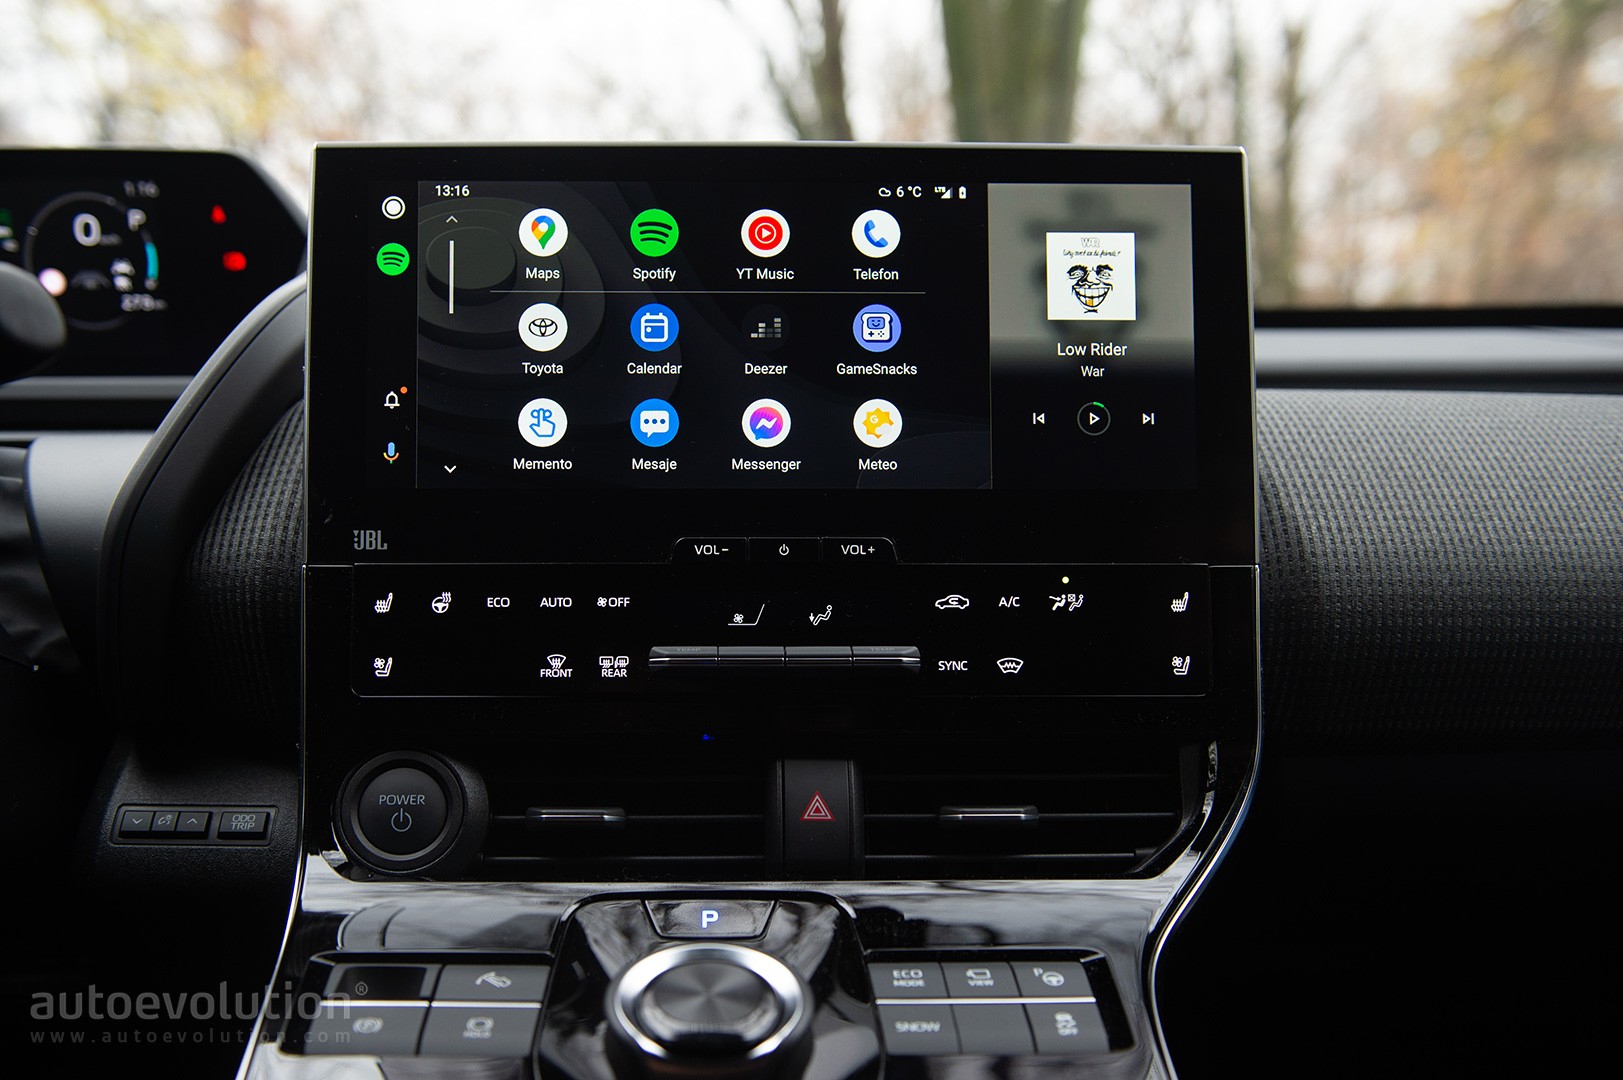 Android Auto 11.1 Allegedly Bringing Bad News to Wired Users